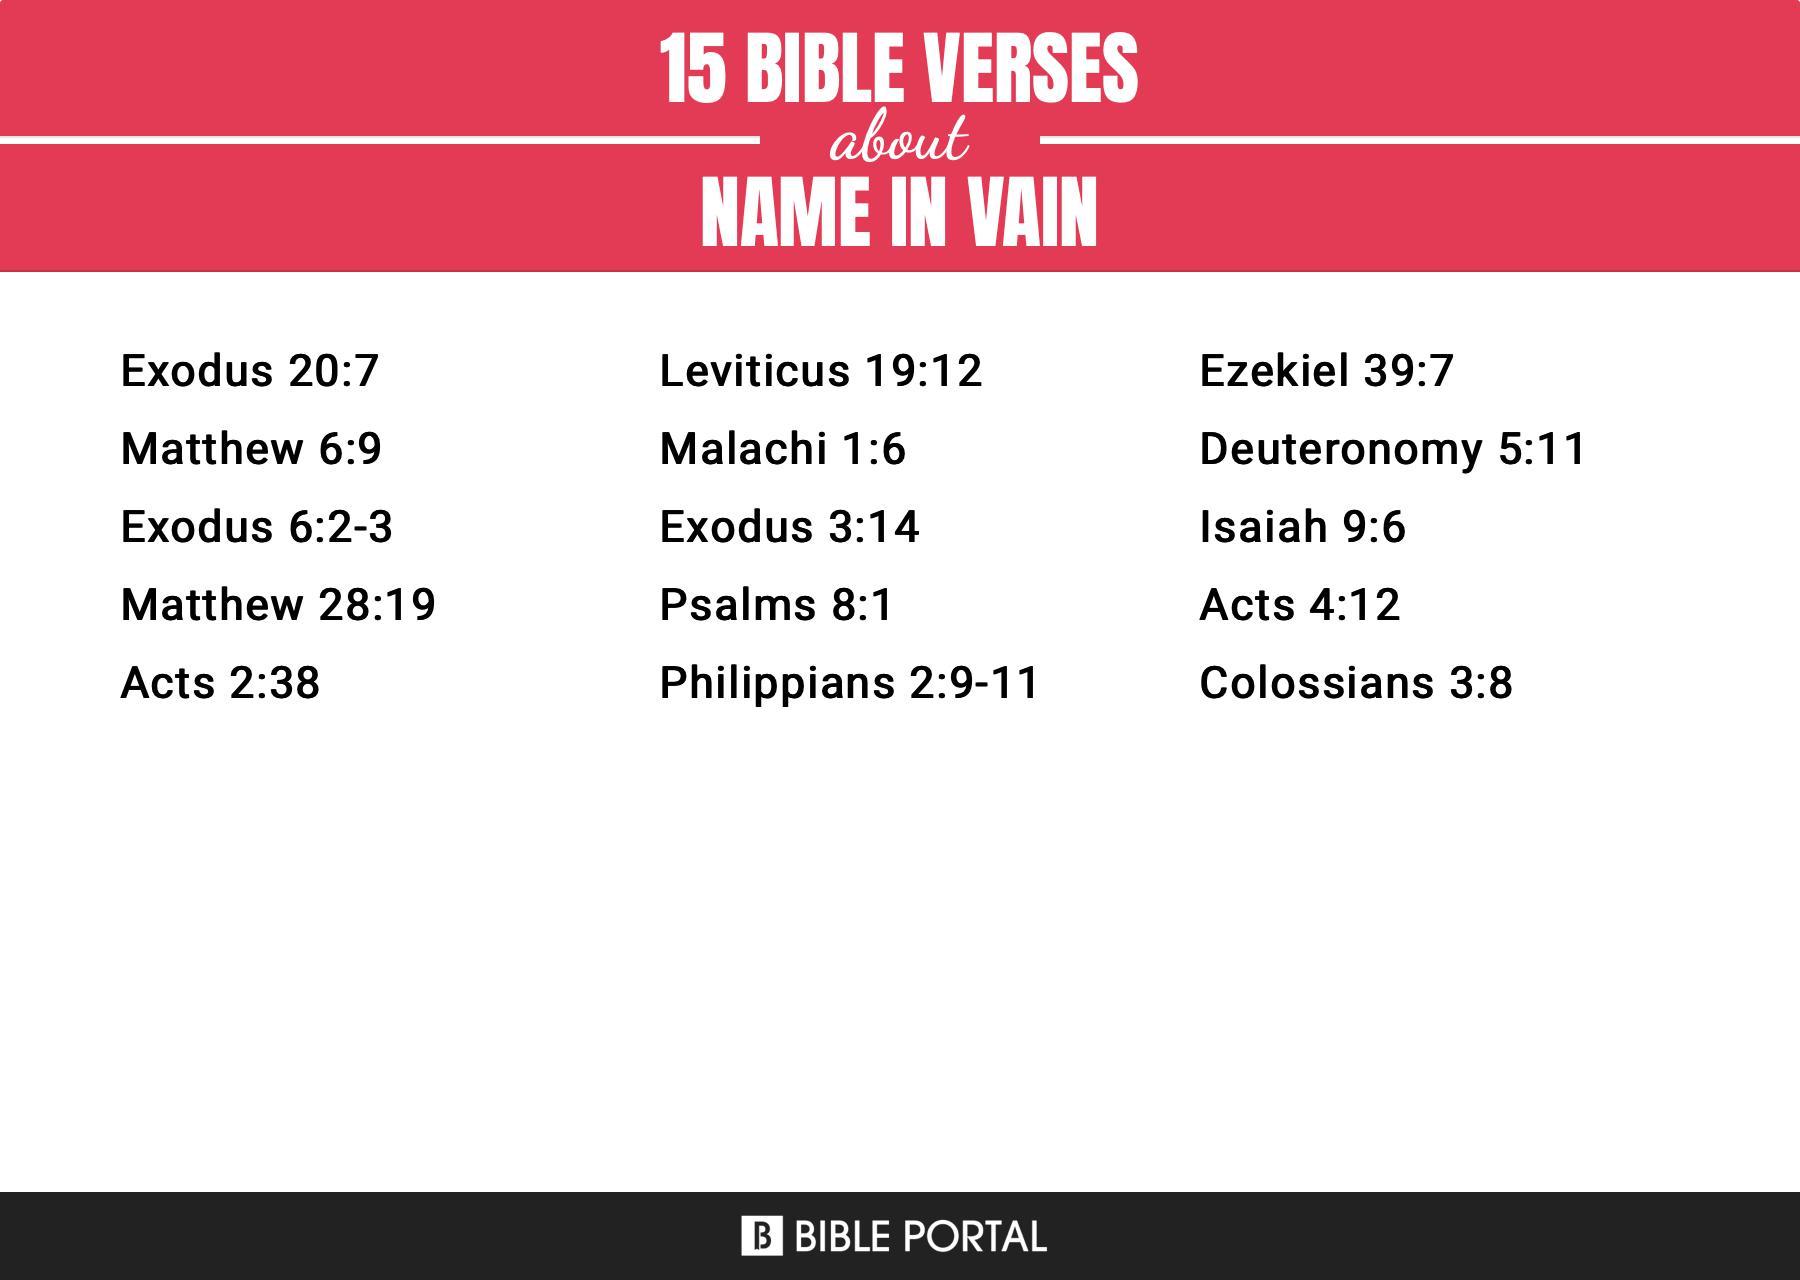 What Does the Bible Say about Name In Vain?